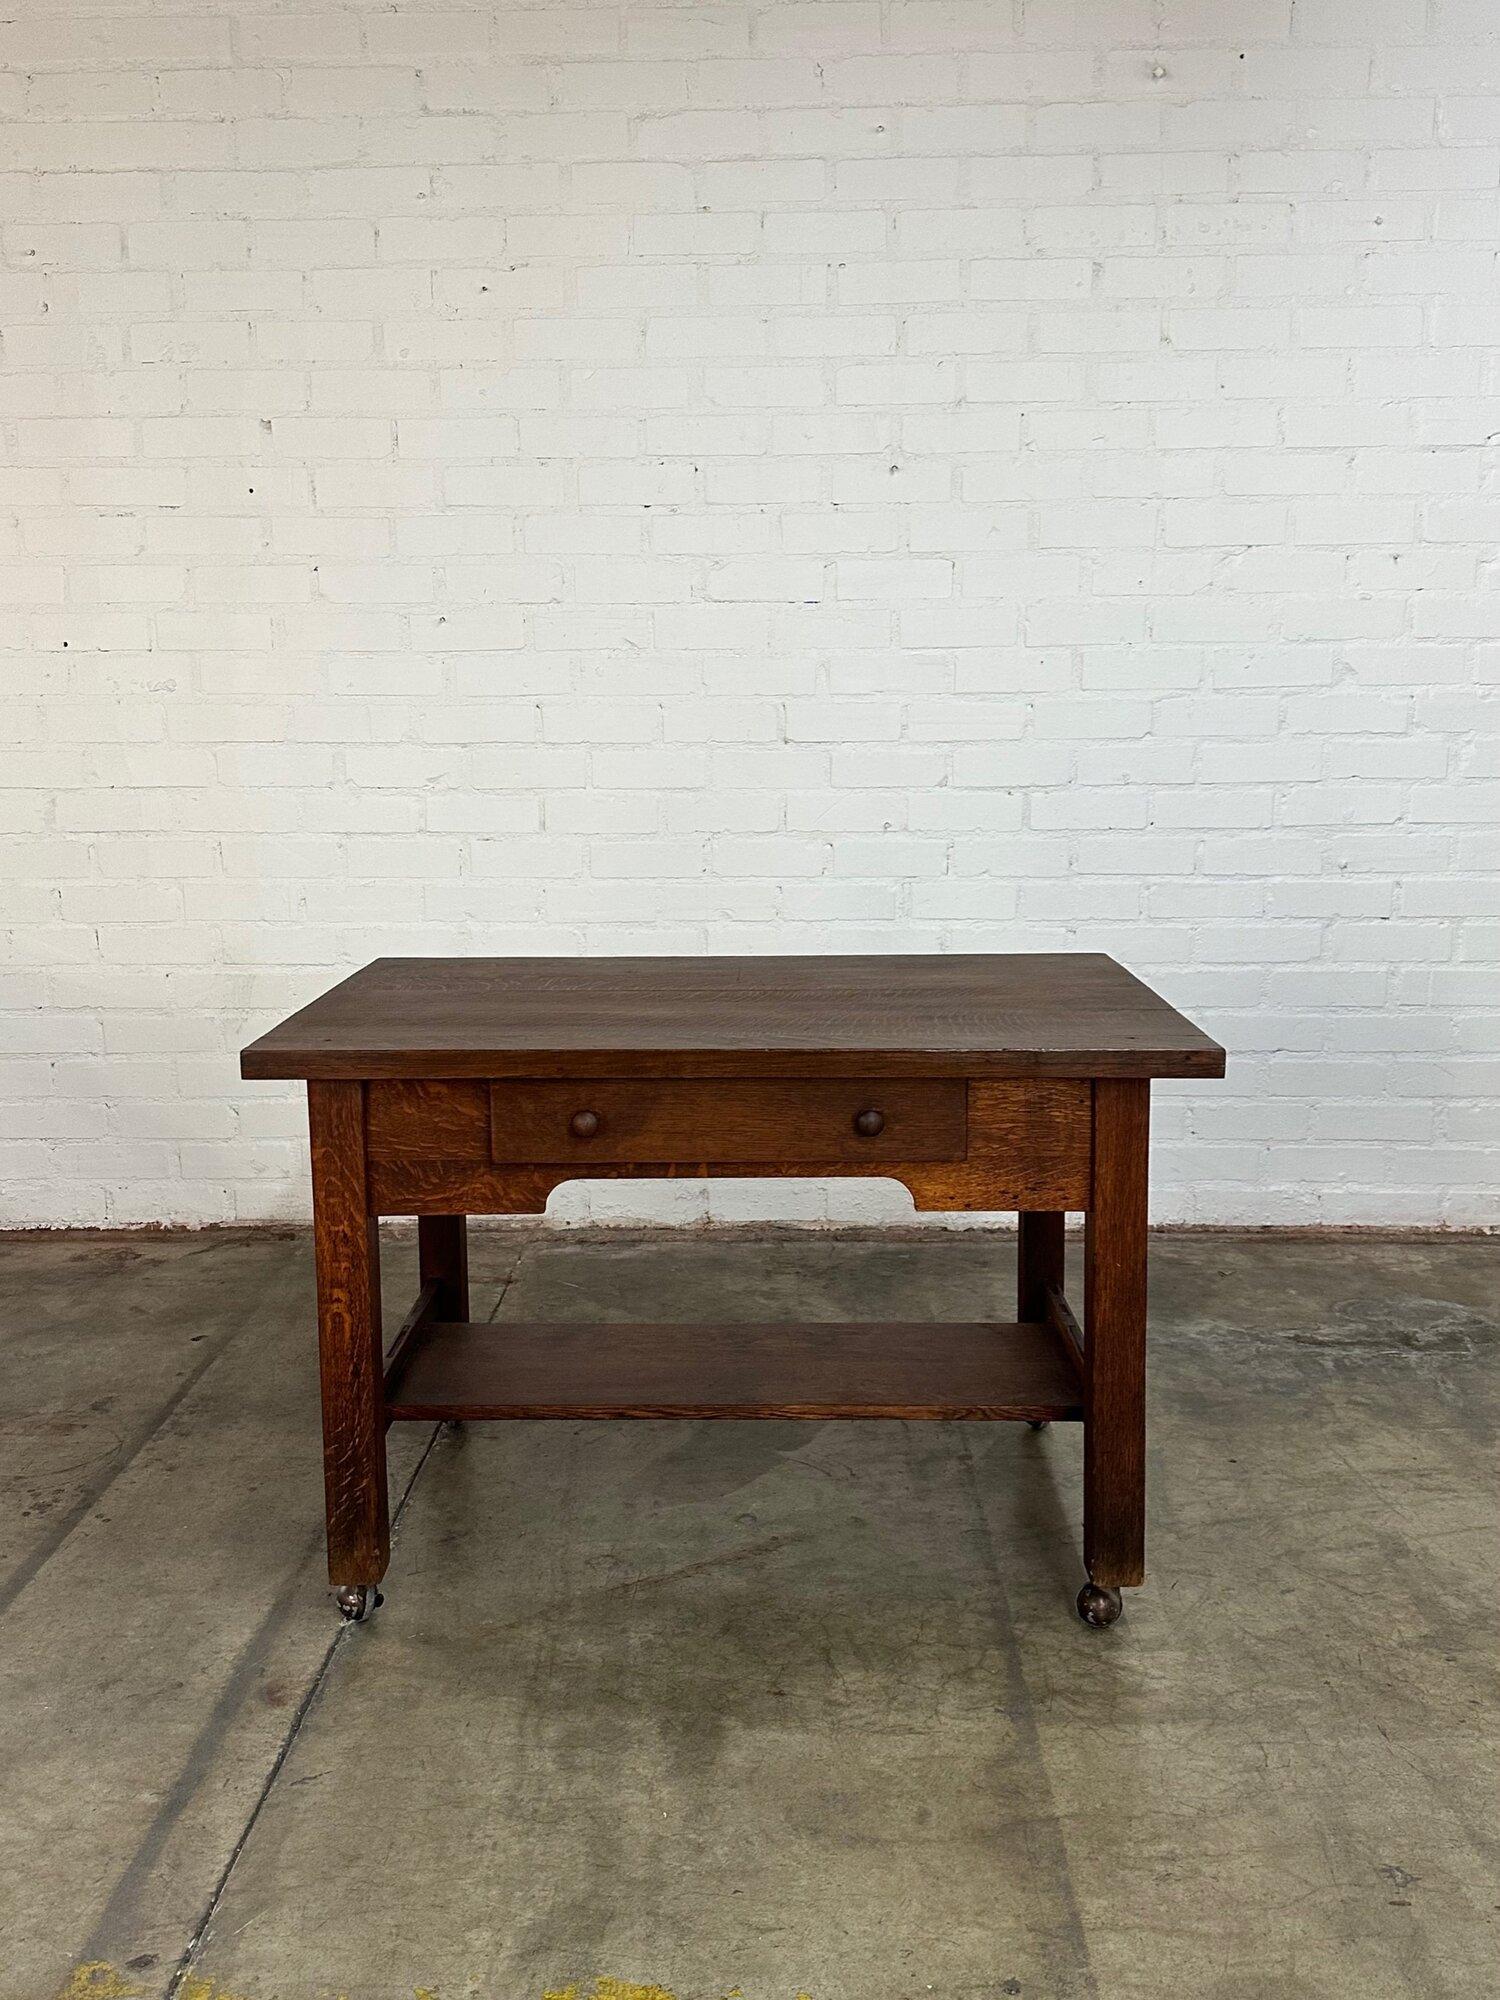 Mahogany Rustic vintage work table on casters